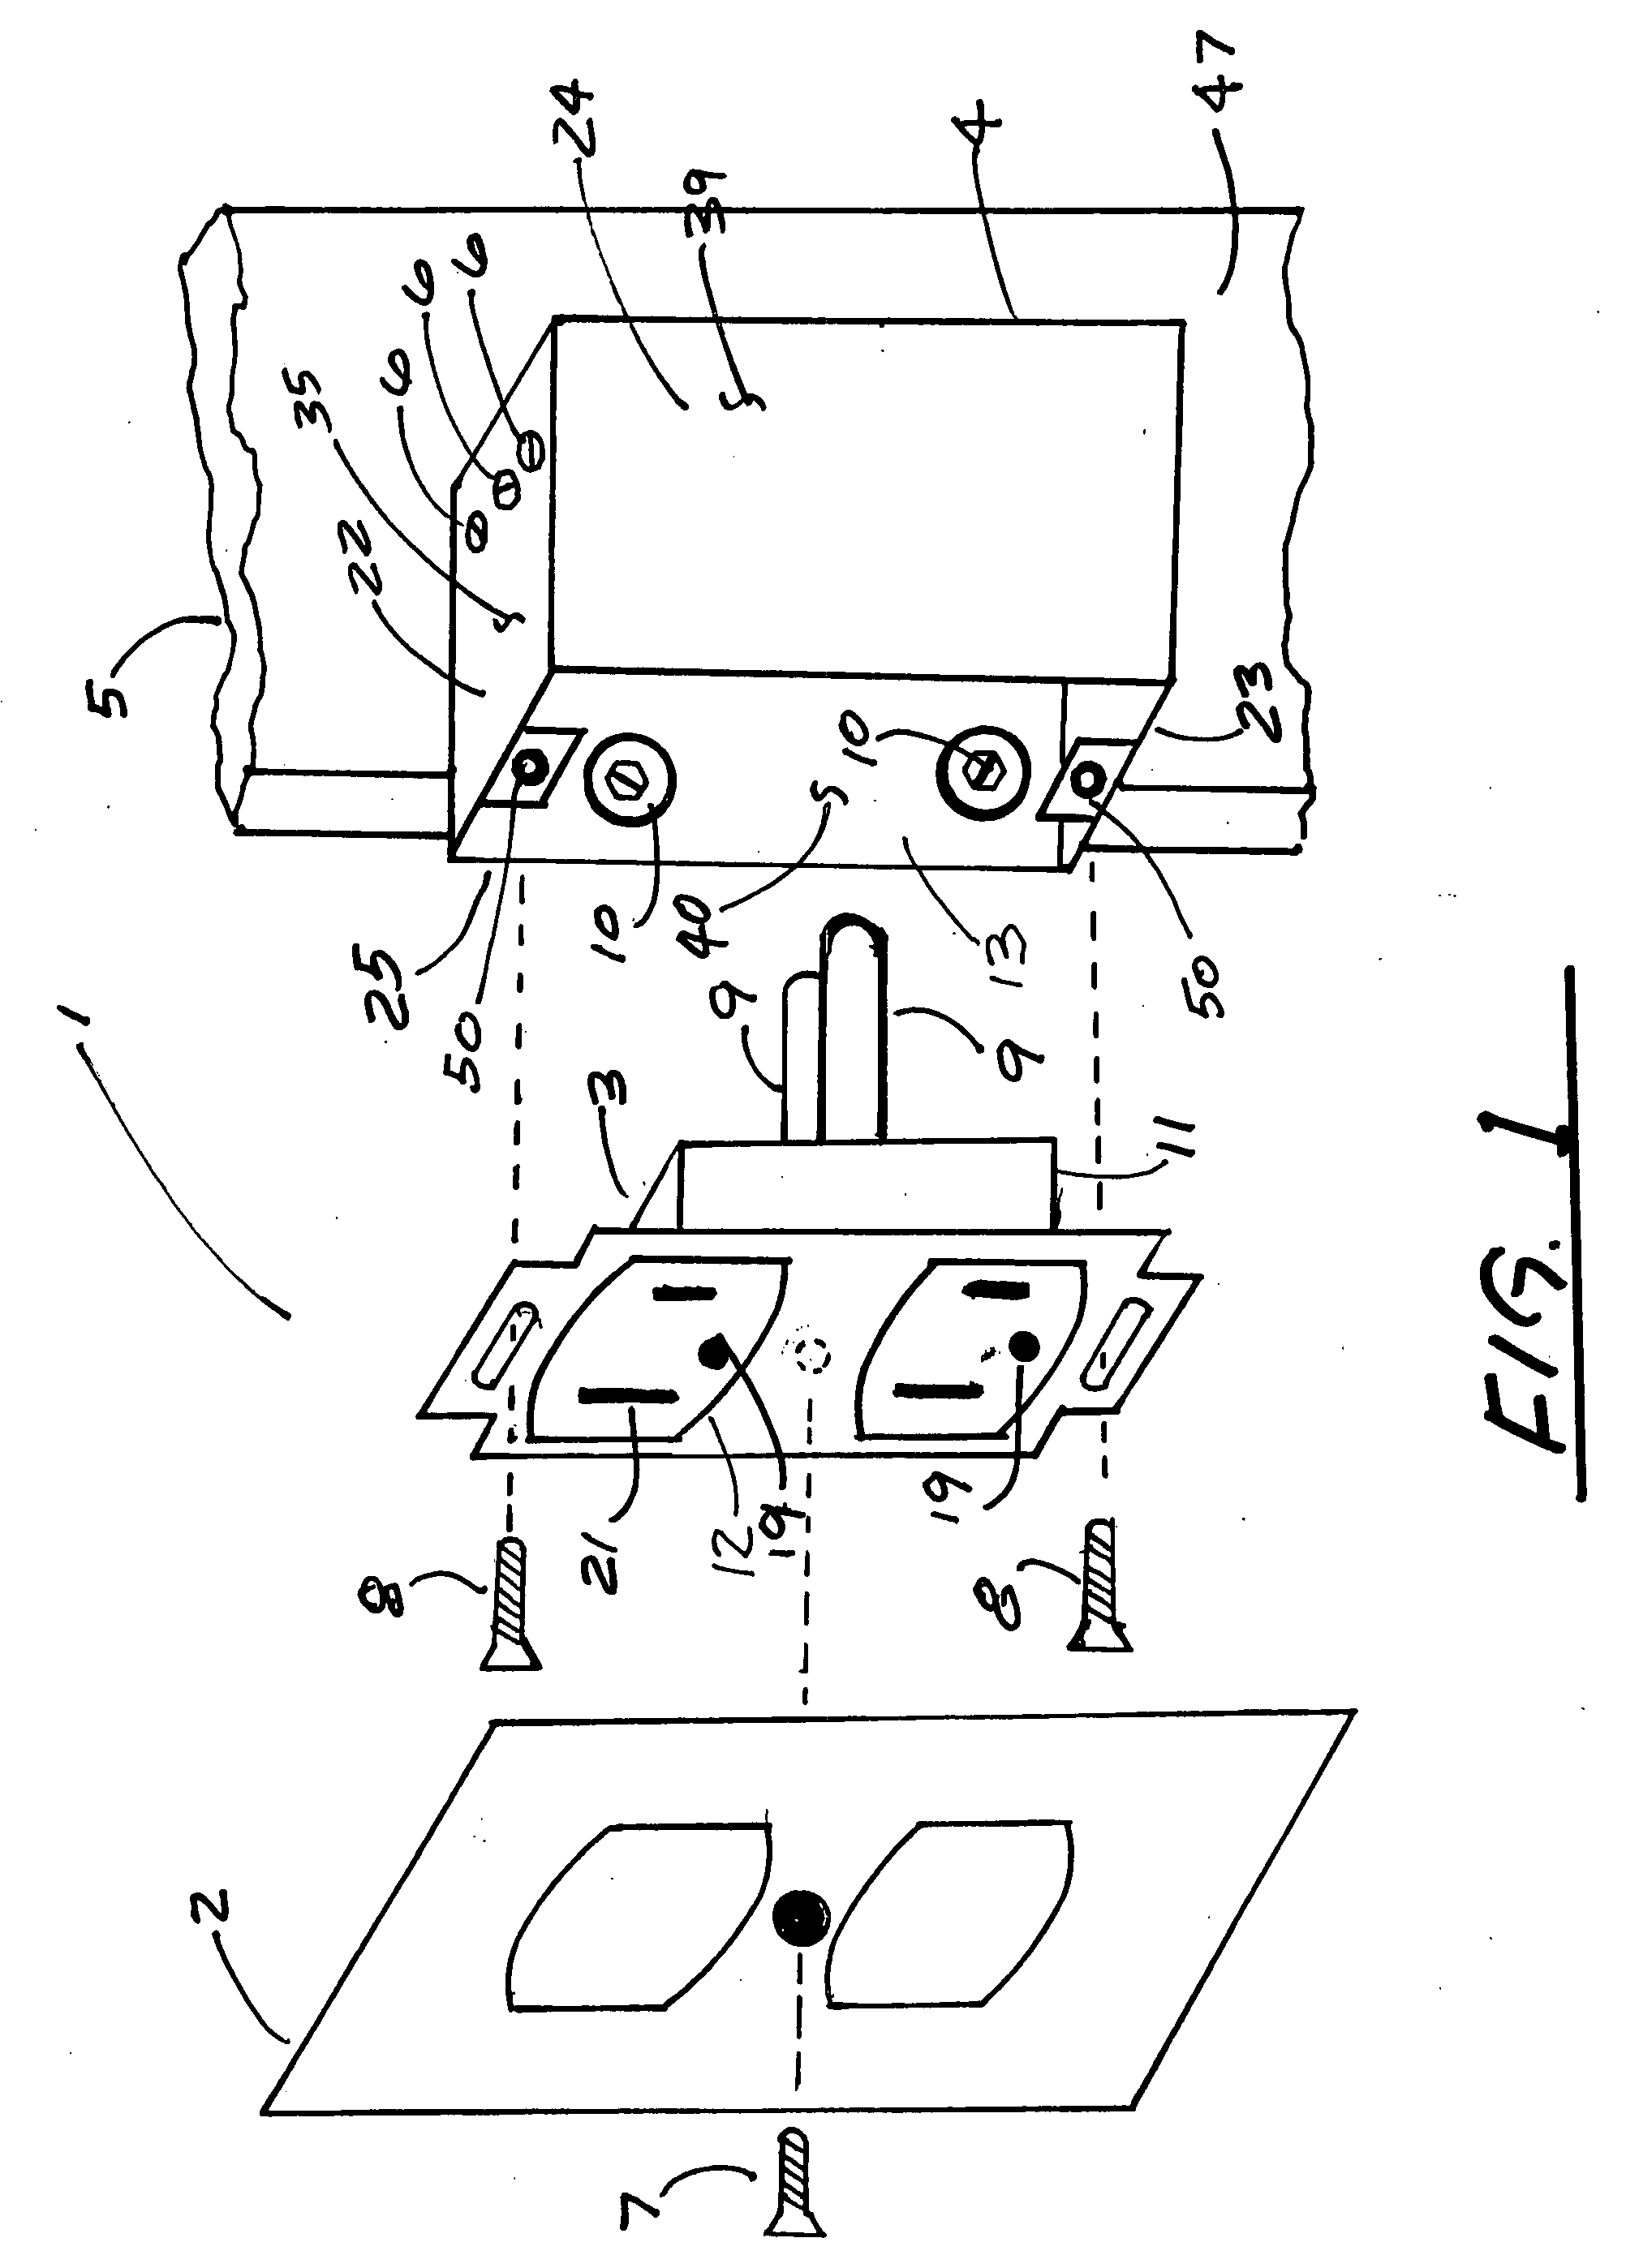 Electrical receptacle and box apparatus